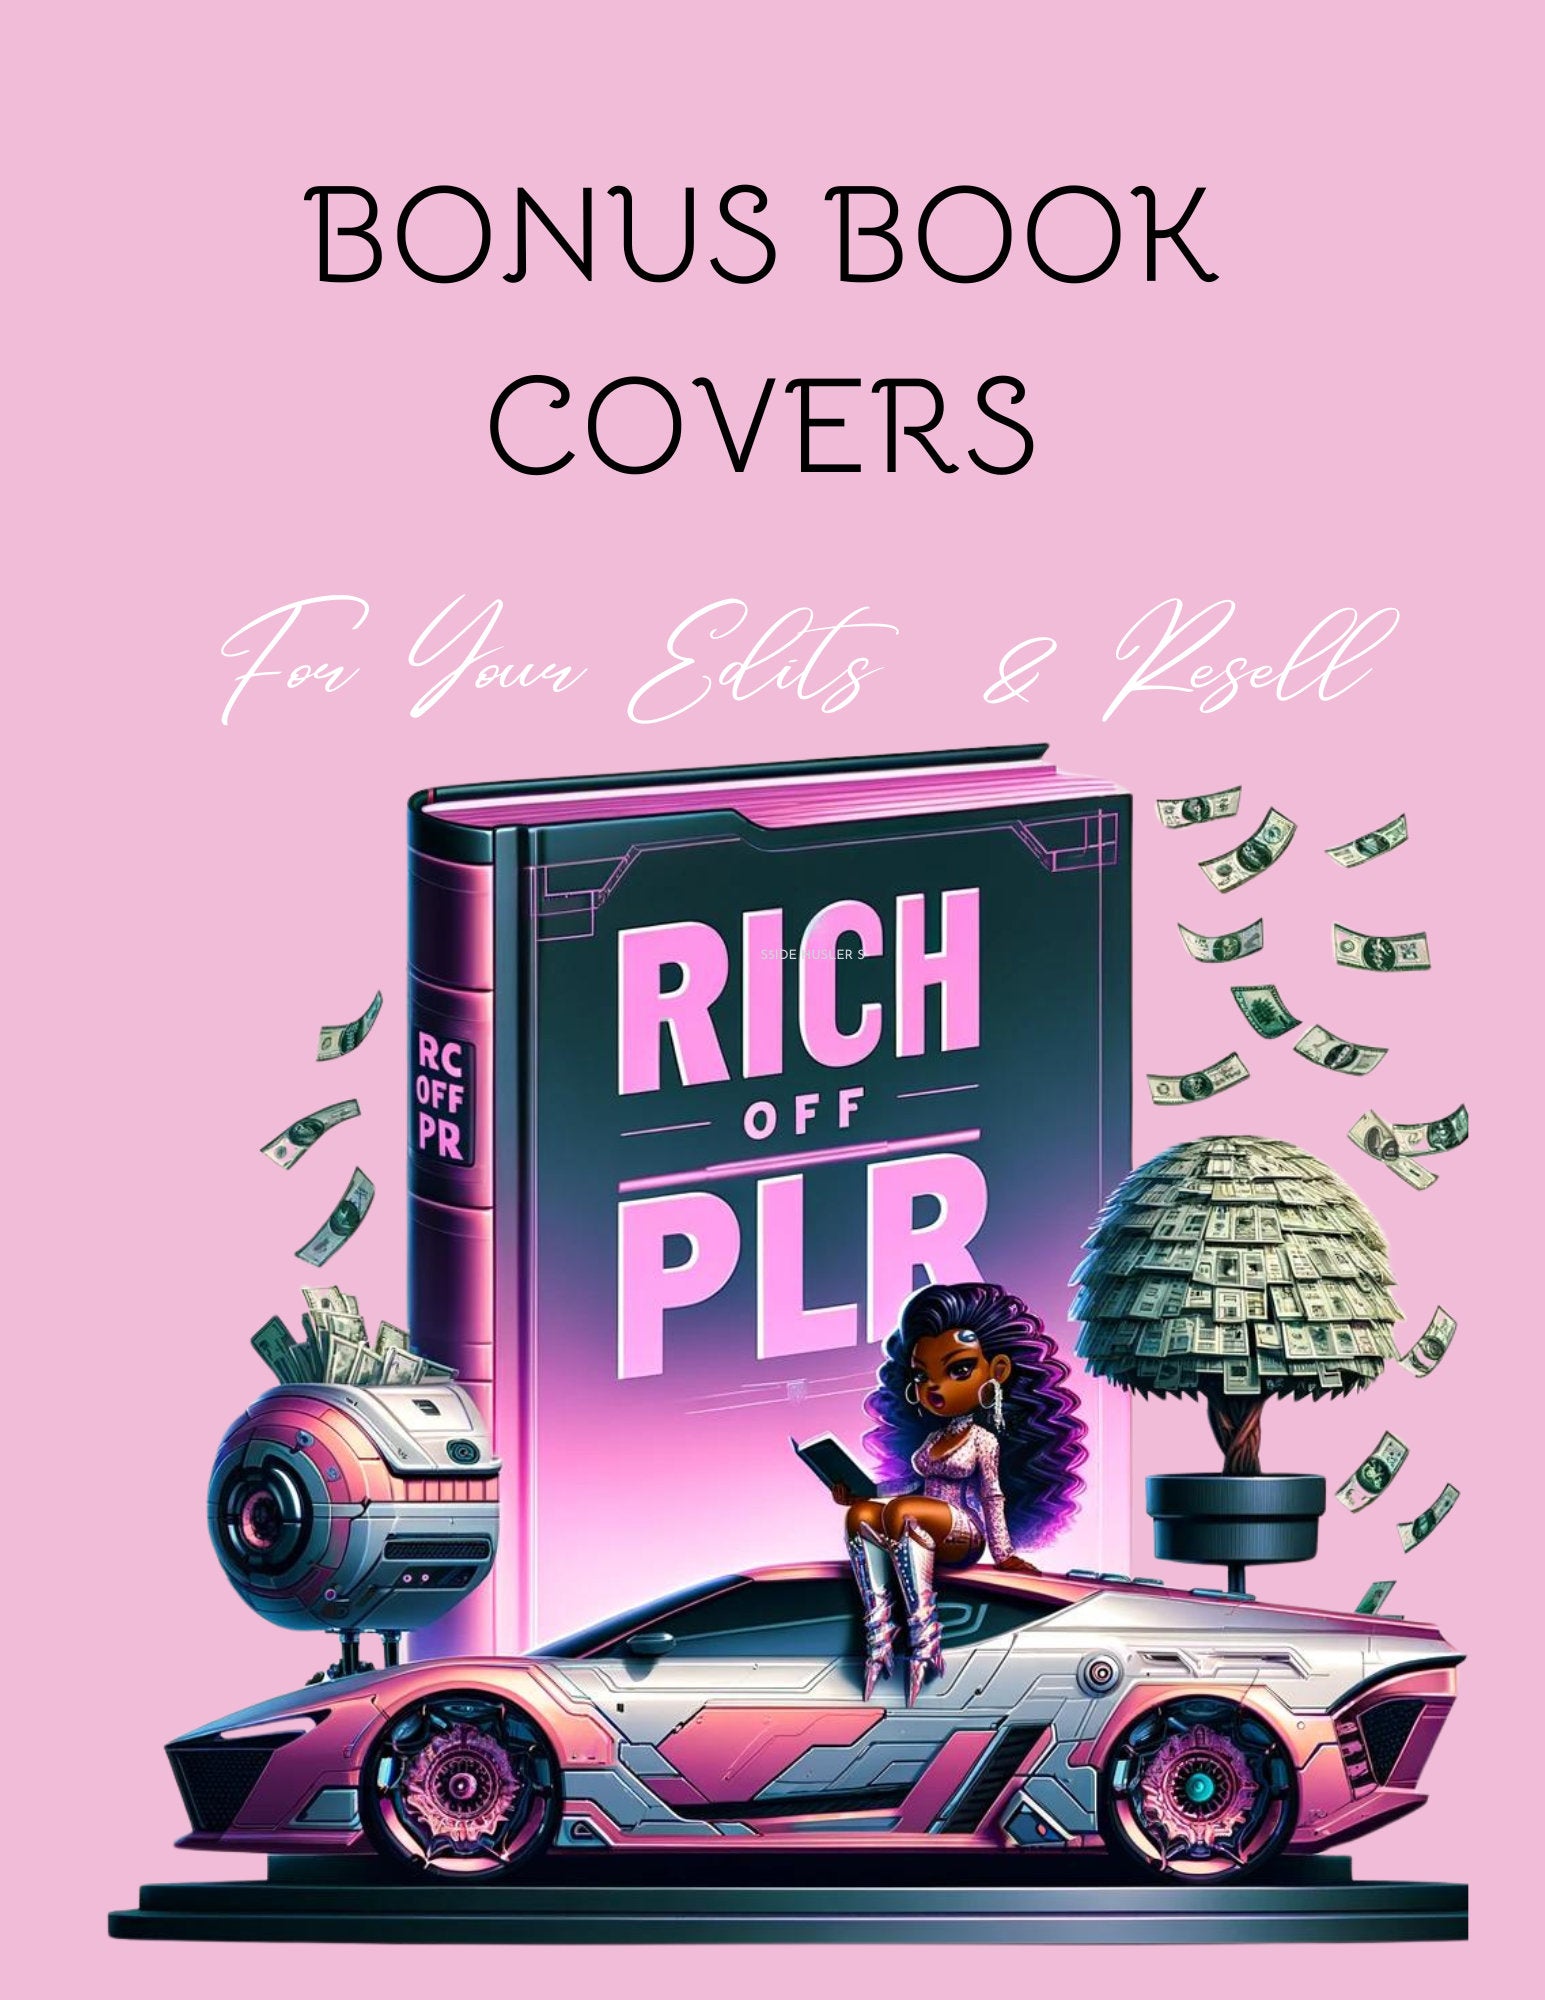 RICH Off PLR E-Book, Your options, What is it? Rights, Make Money, AI, Rewrite Content, Resell Tips & Strategies, Selling Digital Products.